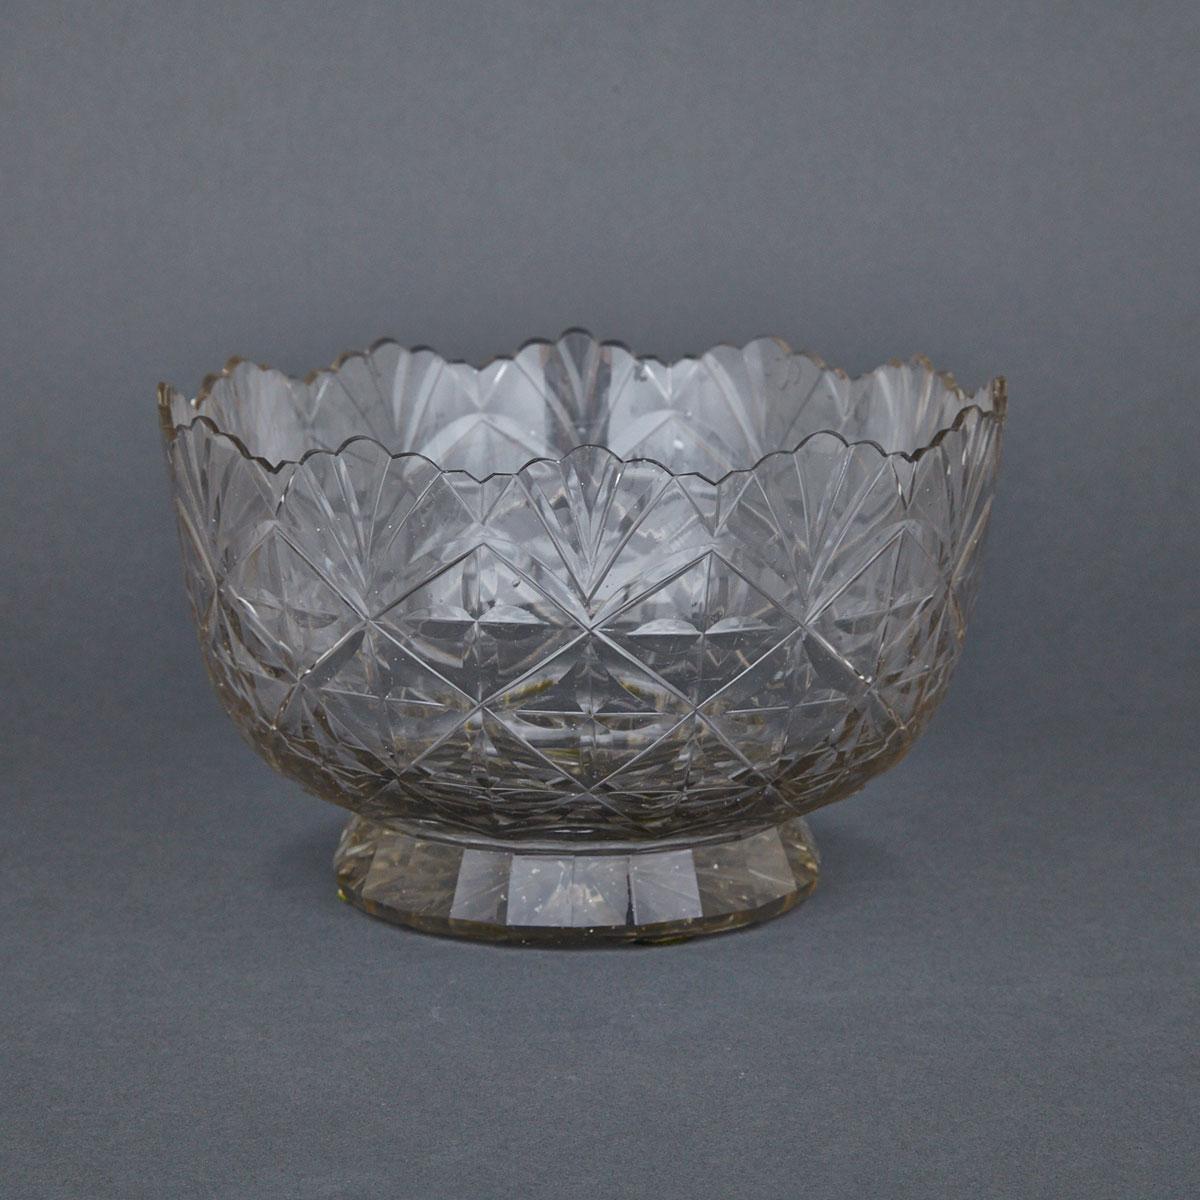 Anglo-Irish Cut Glass Footed Bowl, 19th century